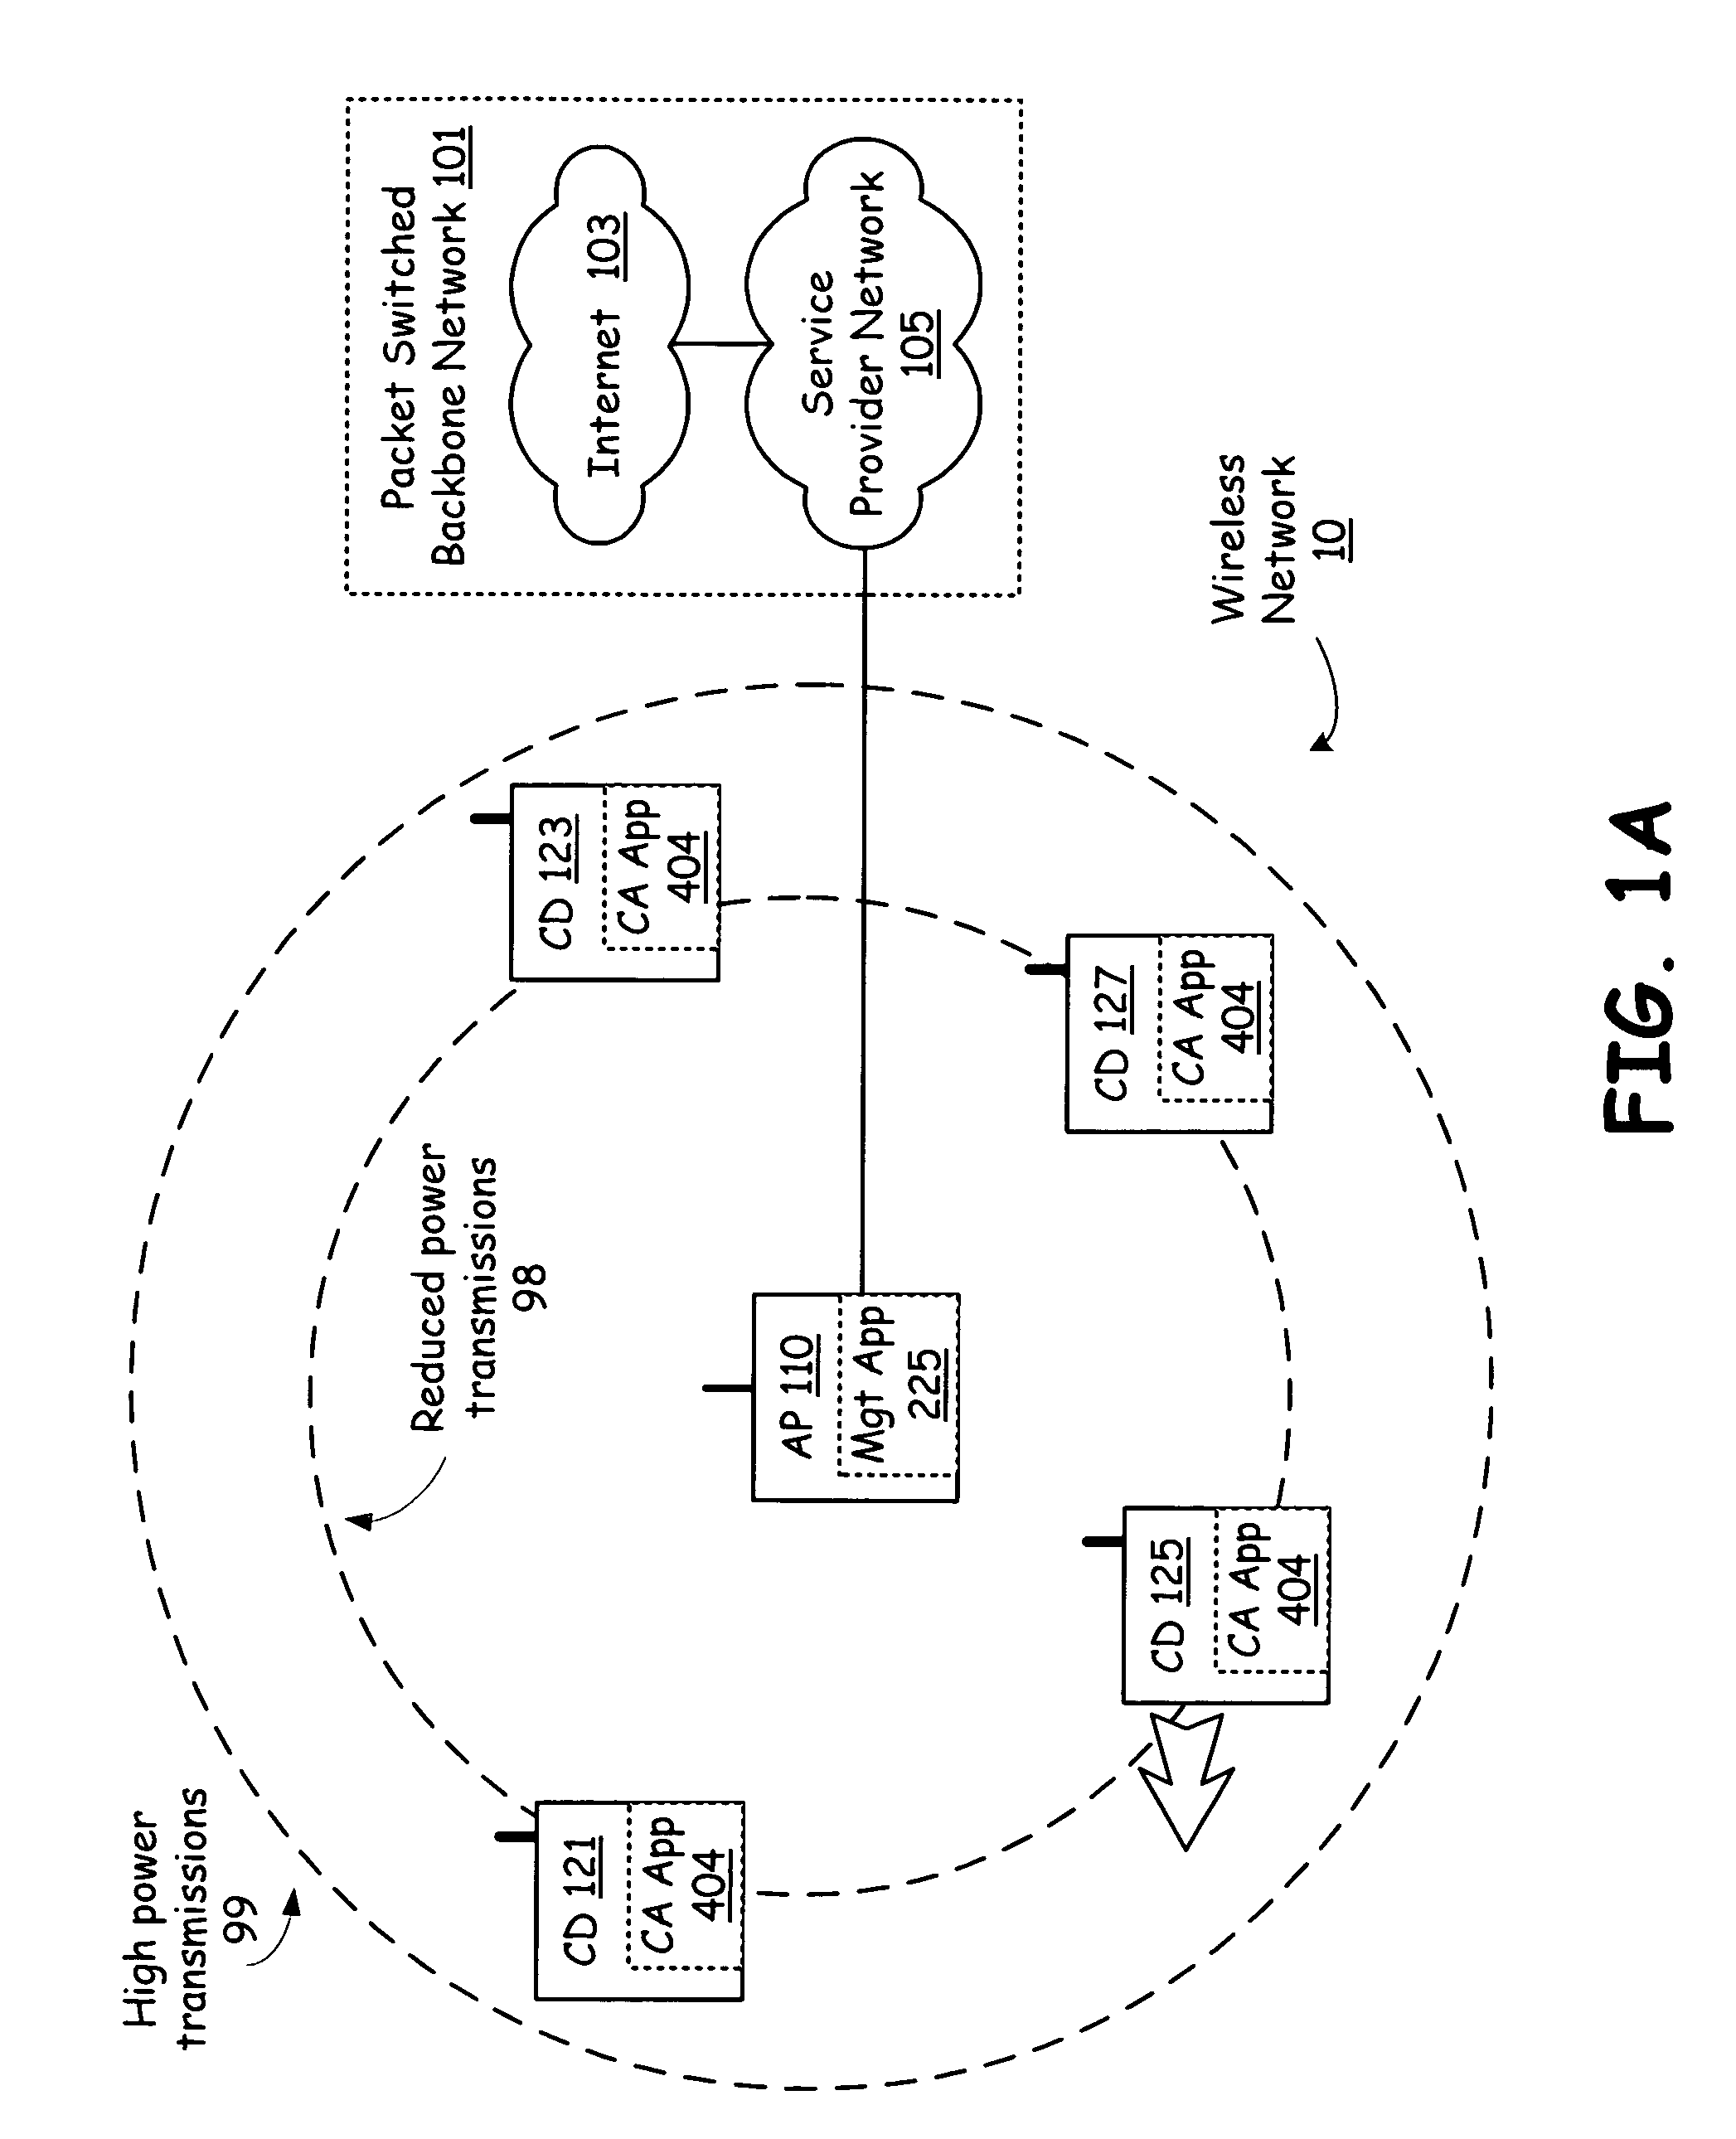 Cell network using friendly relay communication exchanges